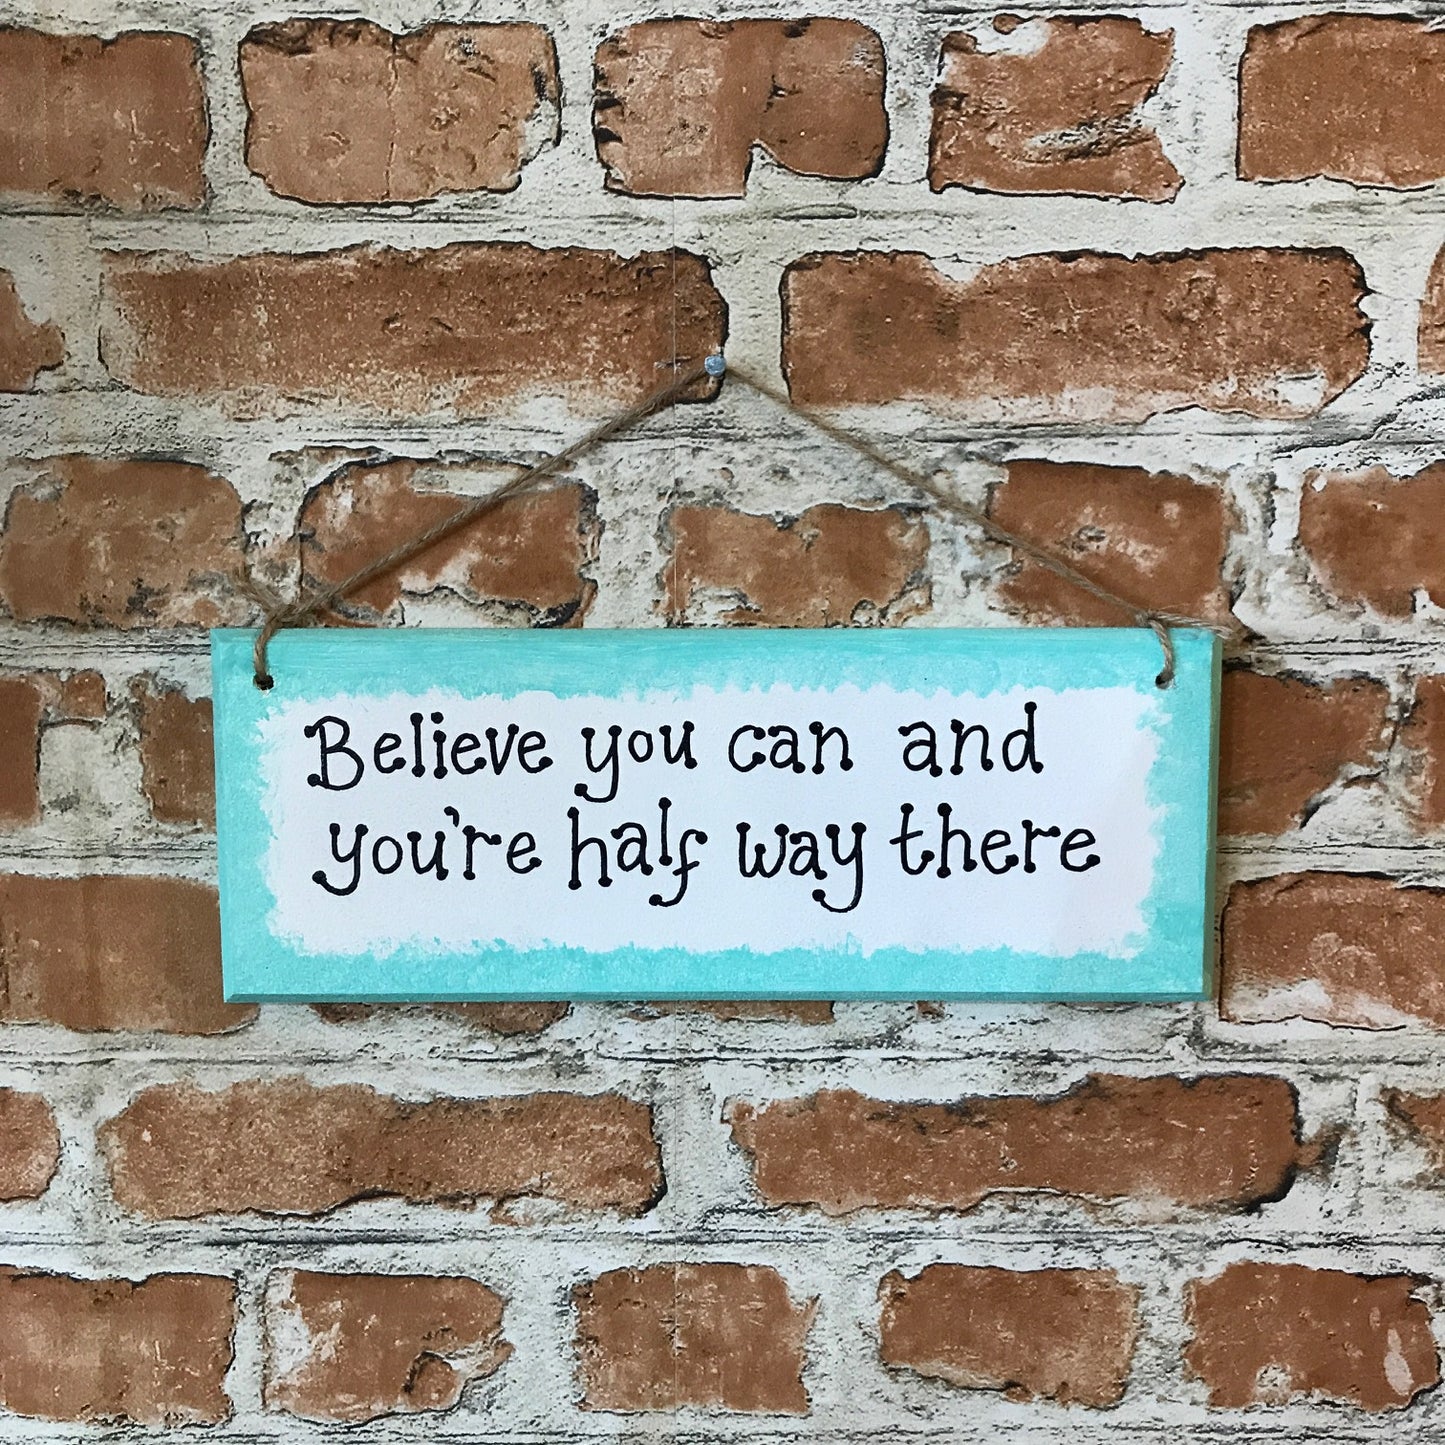 Believe you can and you're half way there - Handmade Wooden Plaque from The Wrong End of Town